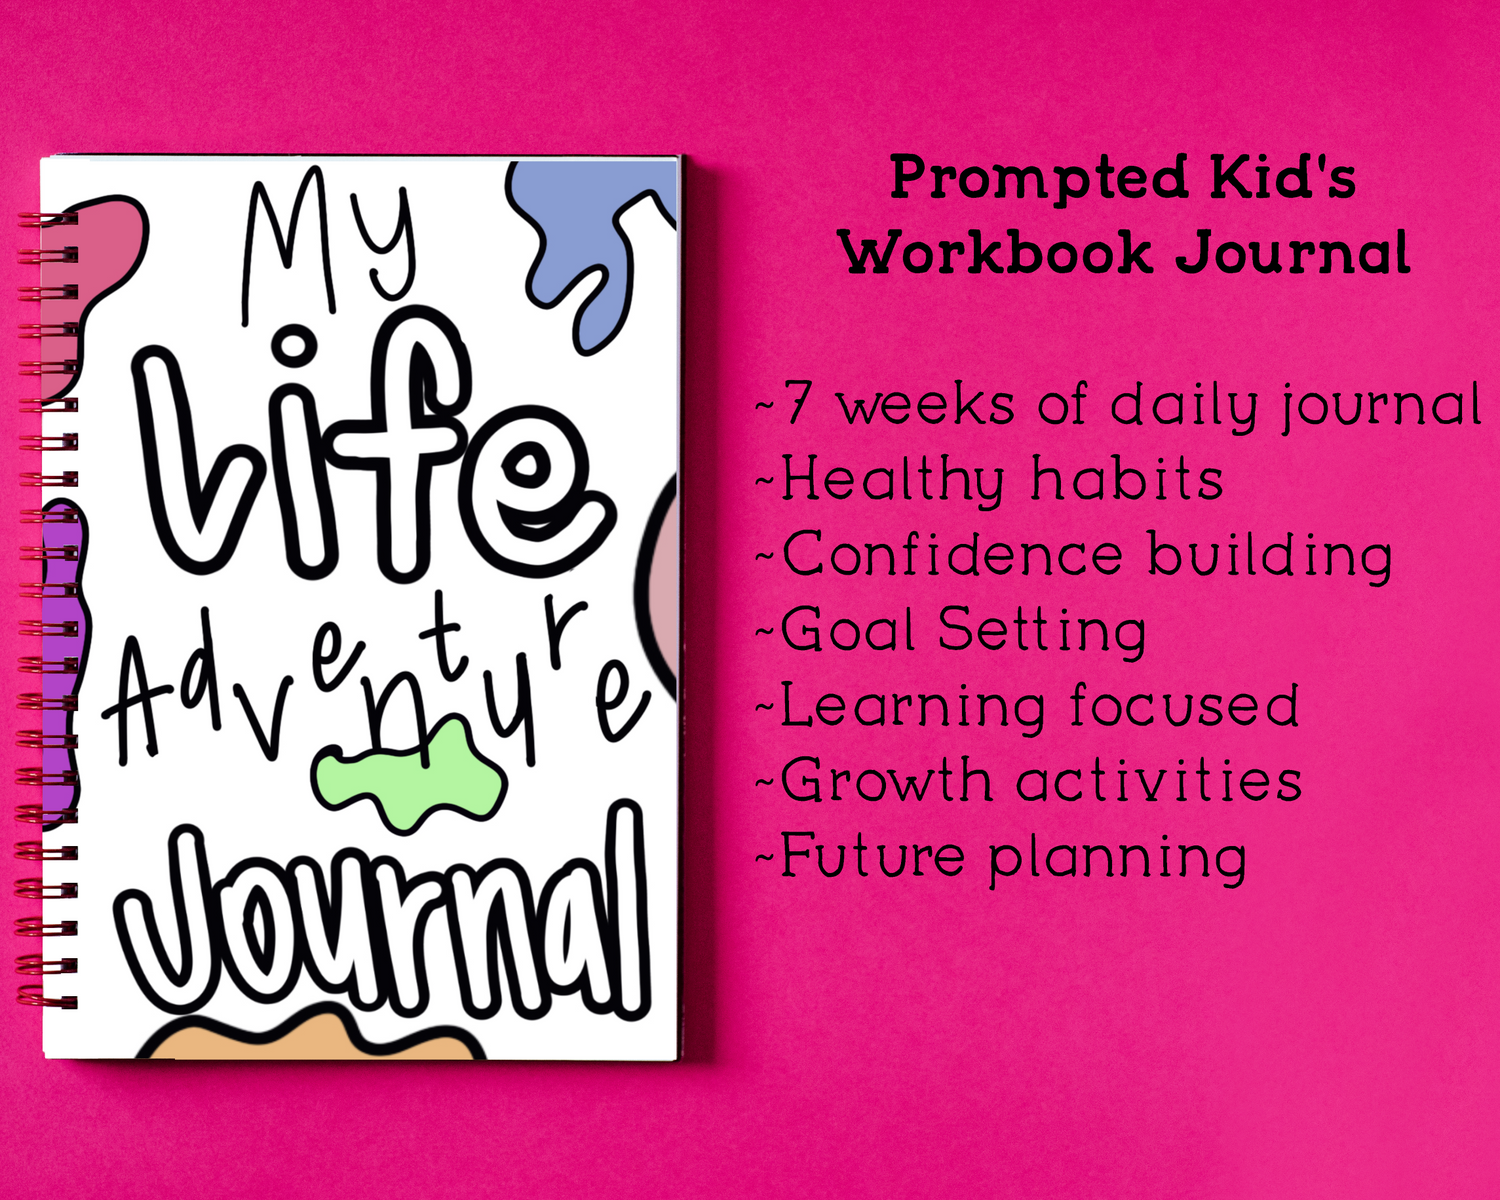 My Life Adventure Journal: A Kids Interactive Journal – Never Stay Stagnant